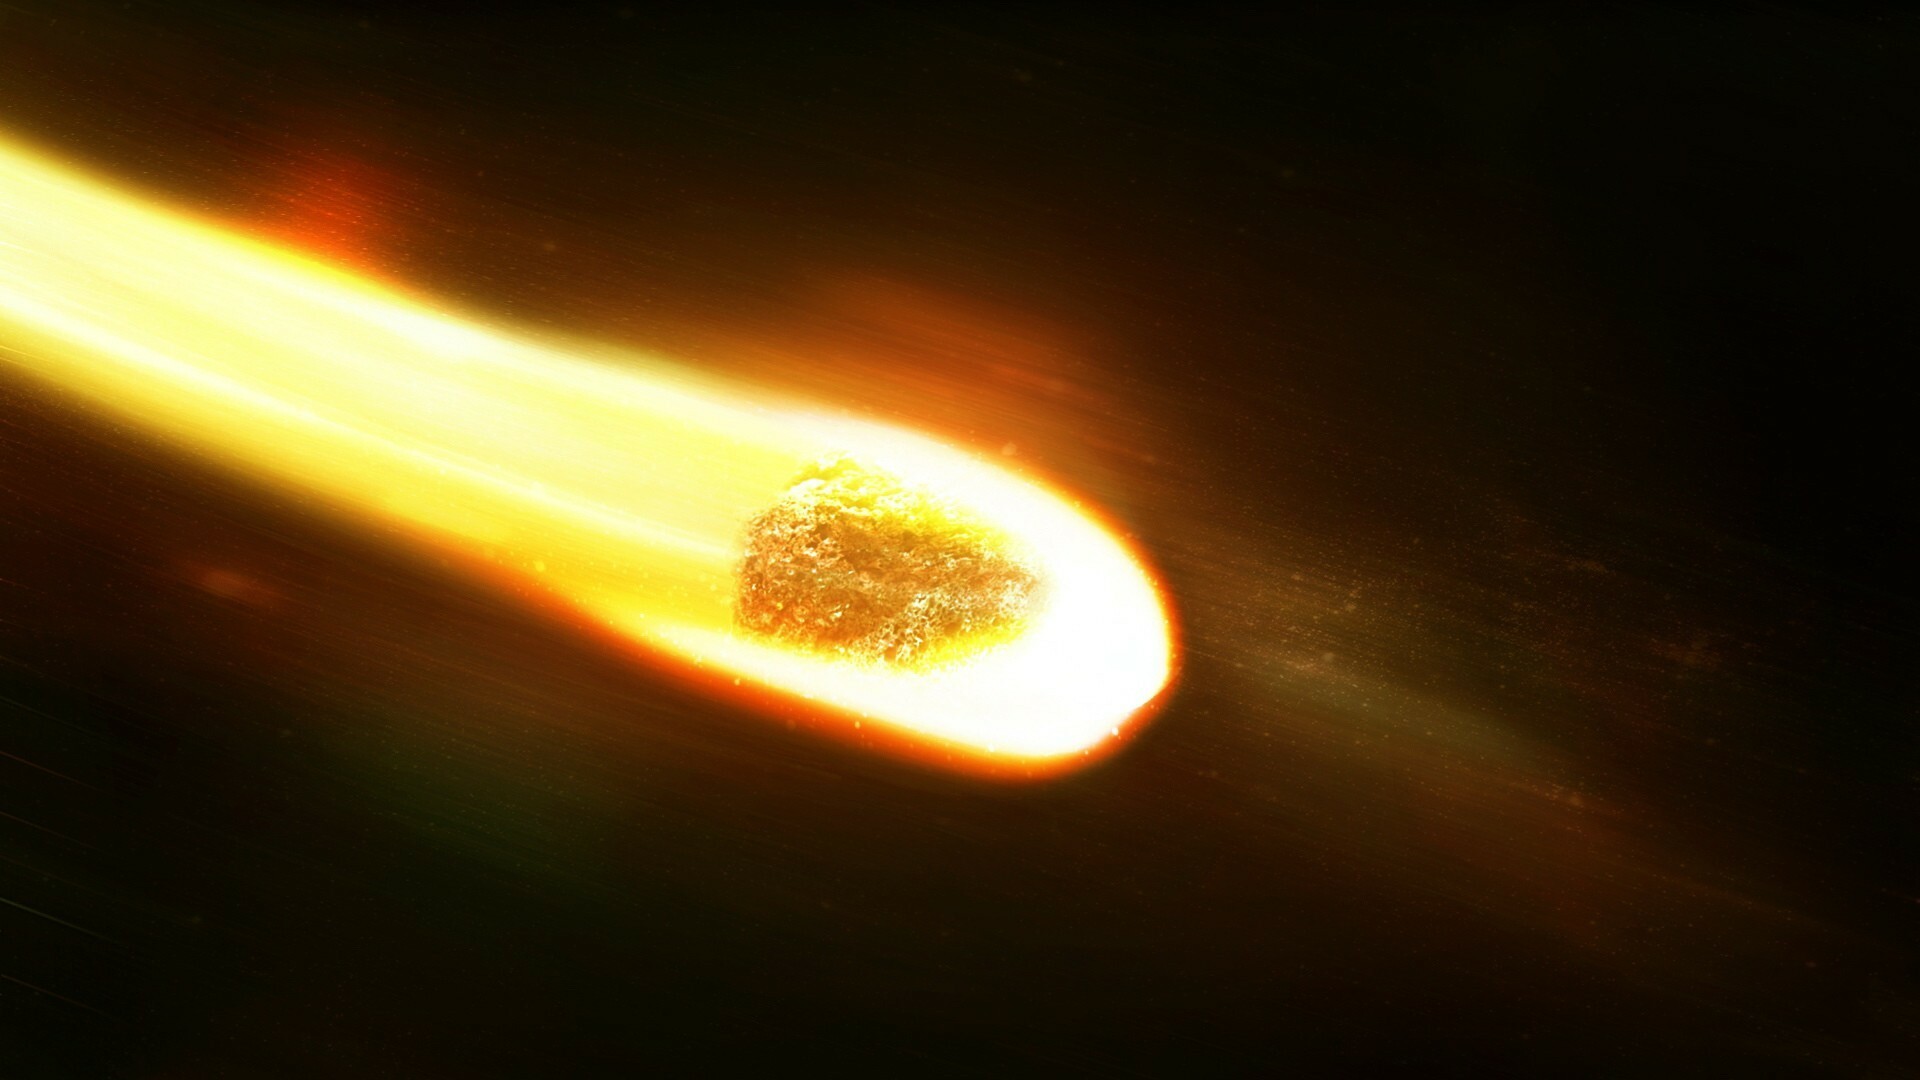 Meteor: A meteoroid, entering Earth's atmosphere at a high speed. 1920x1080 Full HD Background.